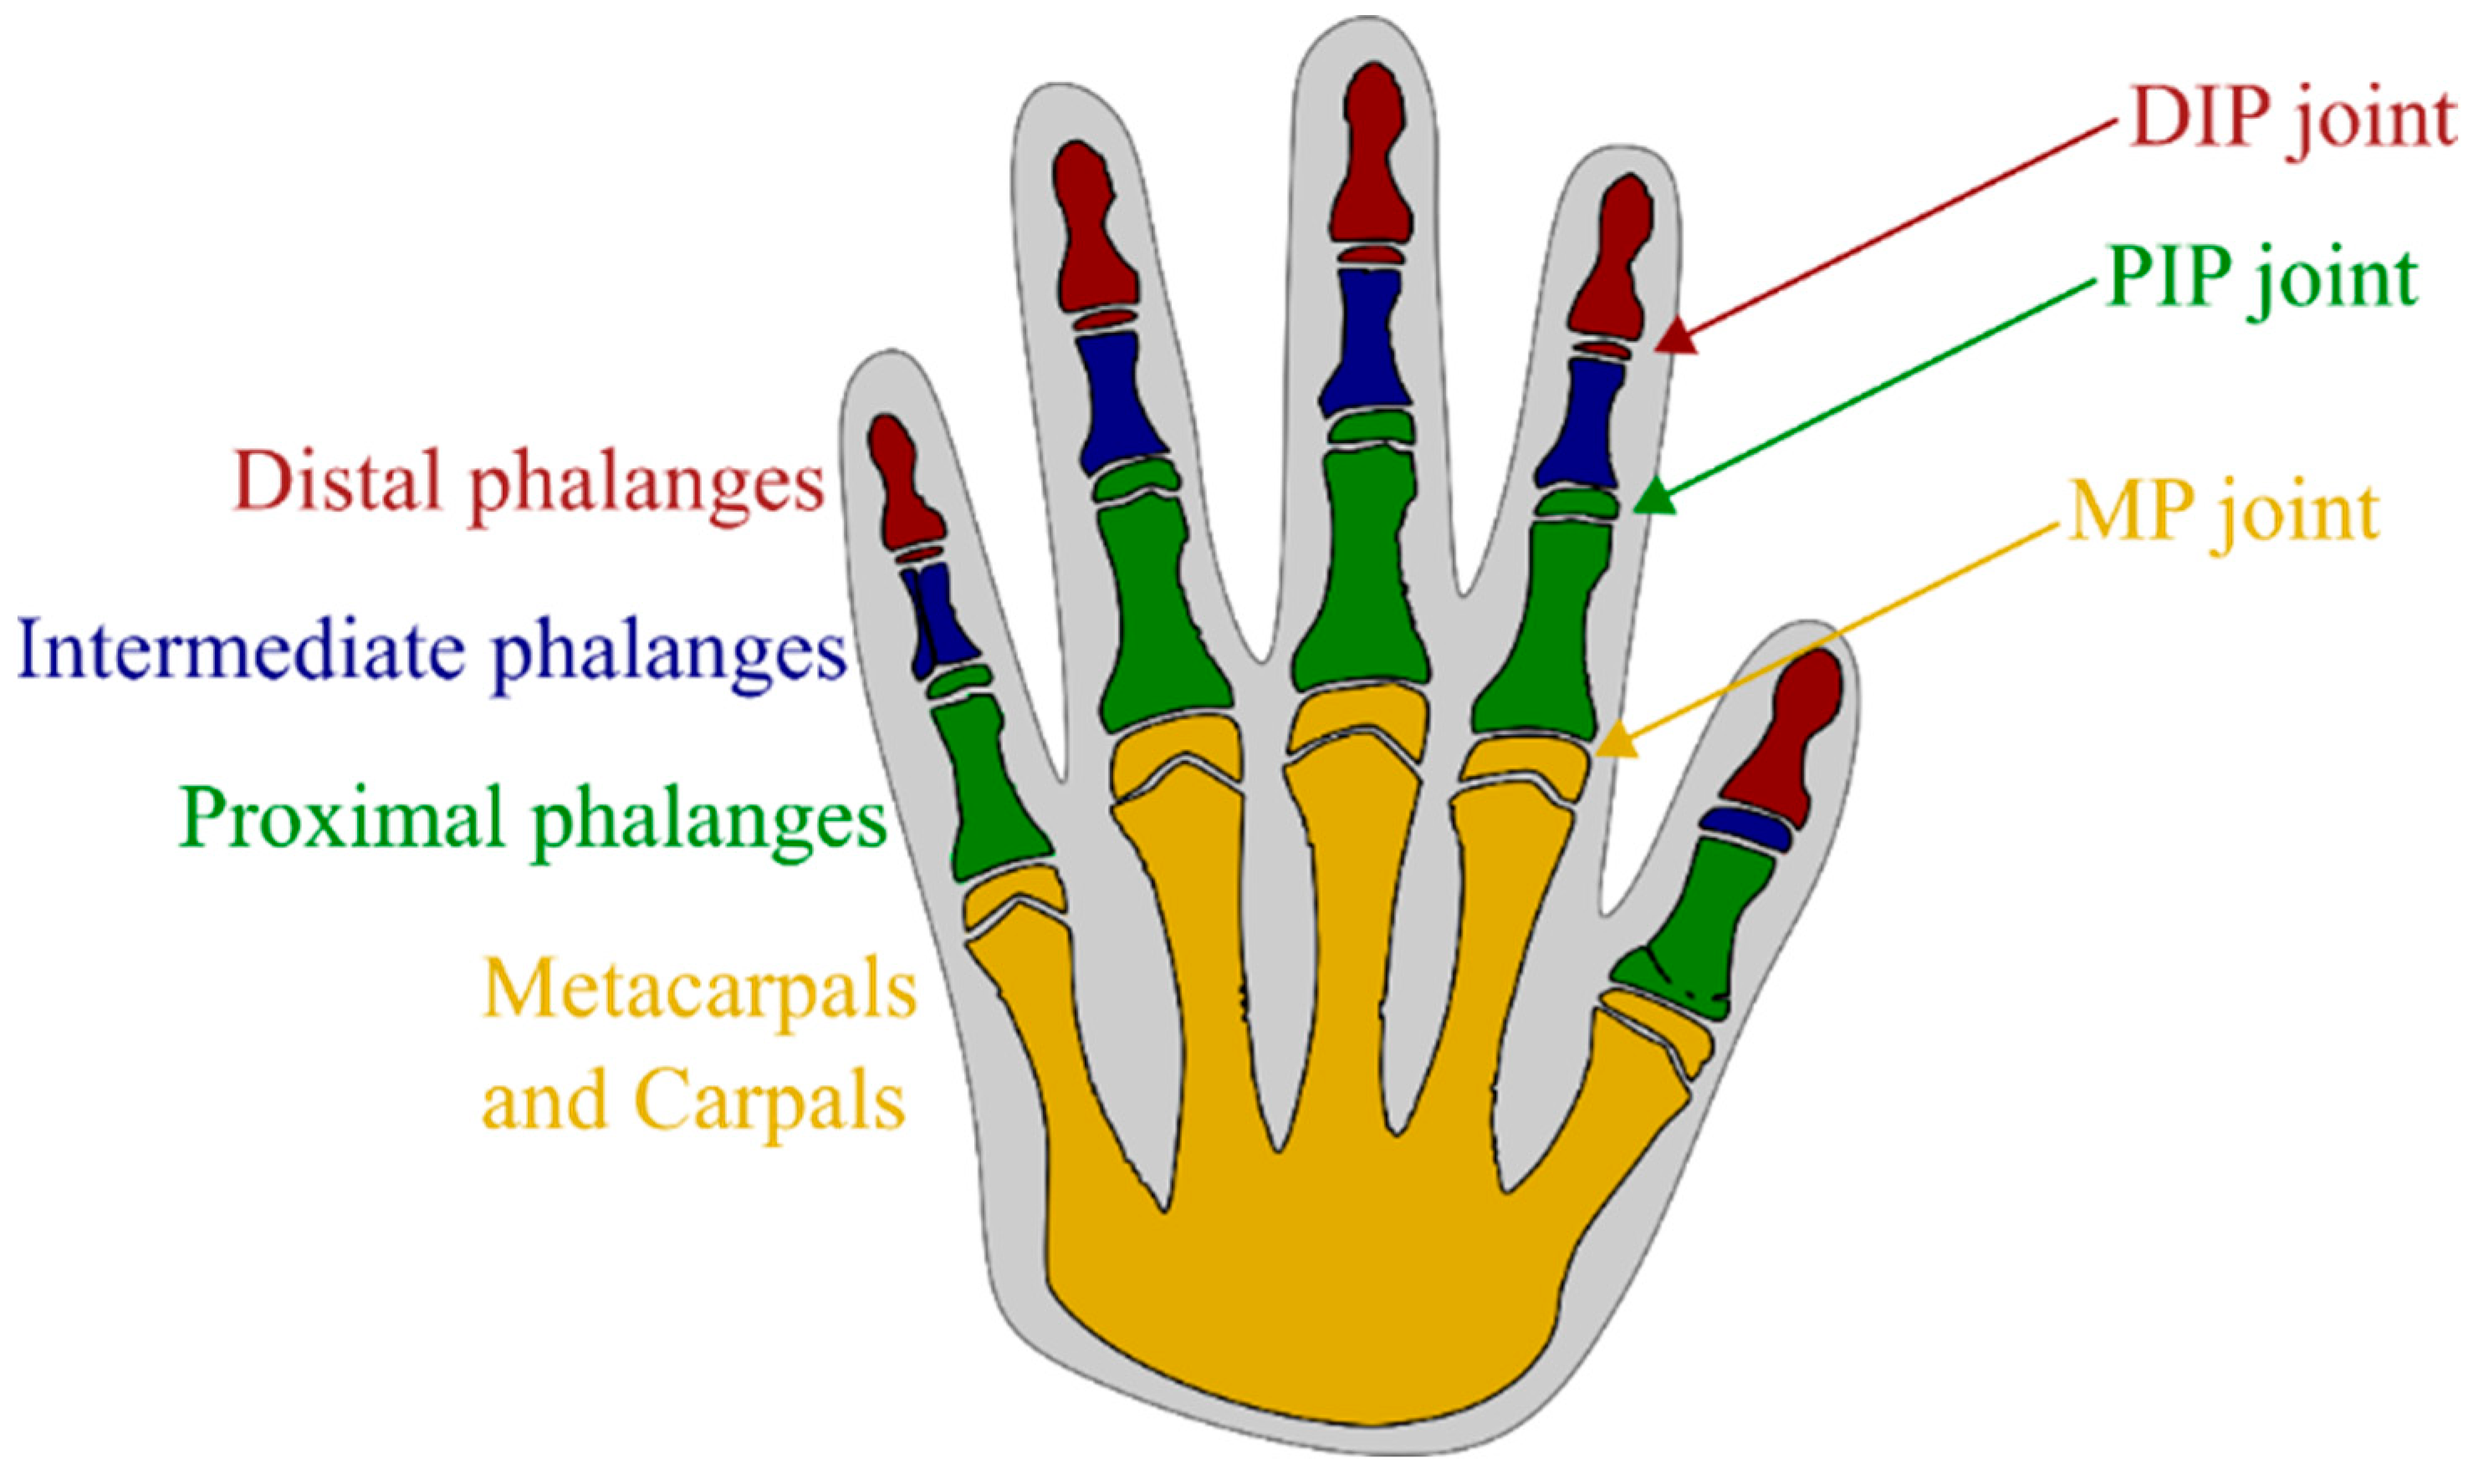 Fingertips rotated about the estimated knuckle poition. Top